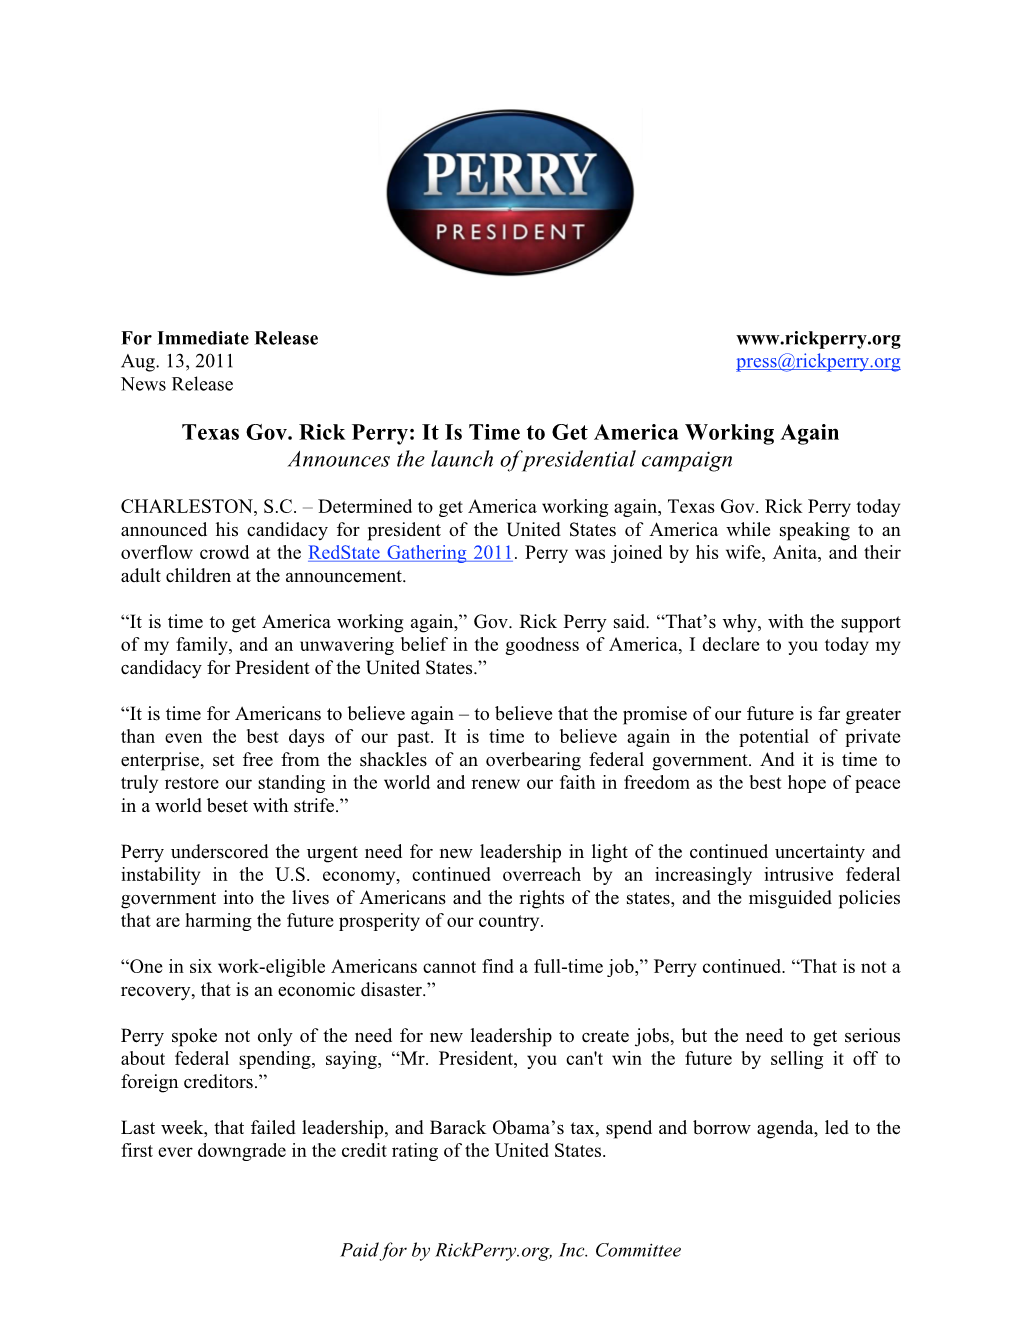 Texas Gov. Rick Perry: It Is Time to Get America Working Again Announces the Launch of Presidential Campaign